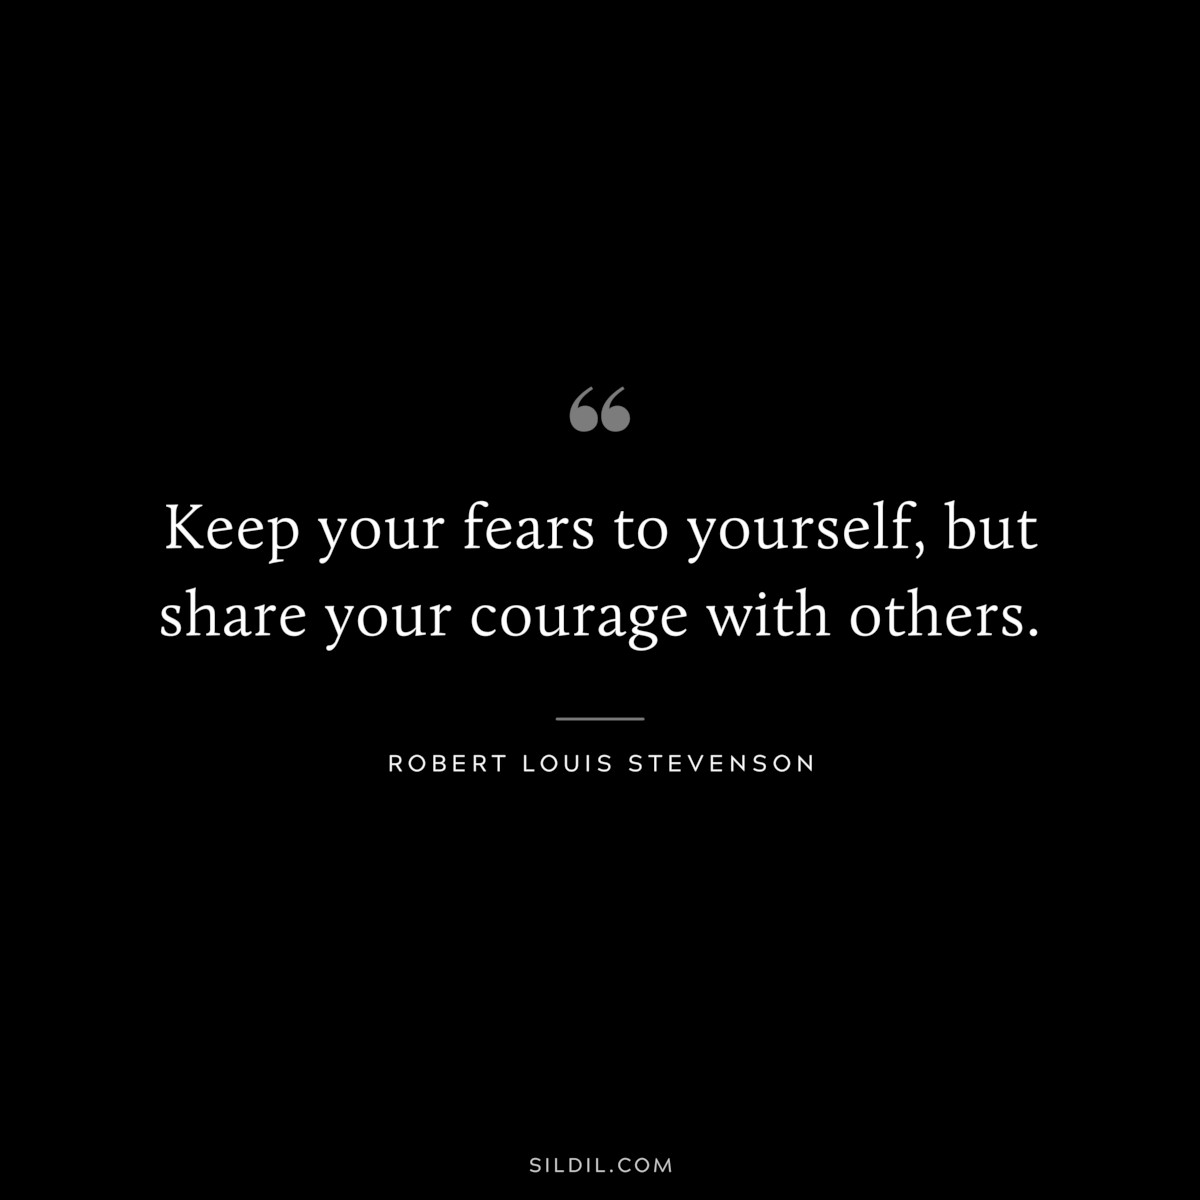 Keep your fears to yourself, but share your courage with others. ― Robert Louis Stevenson